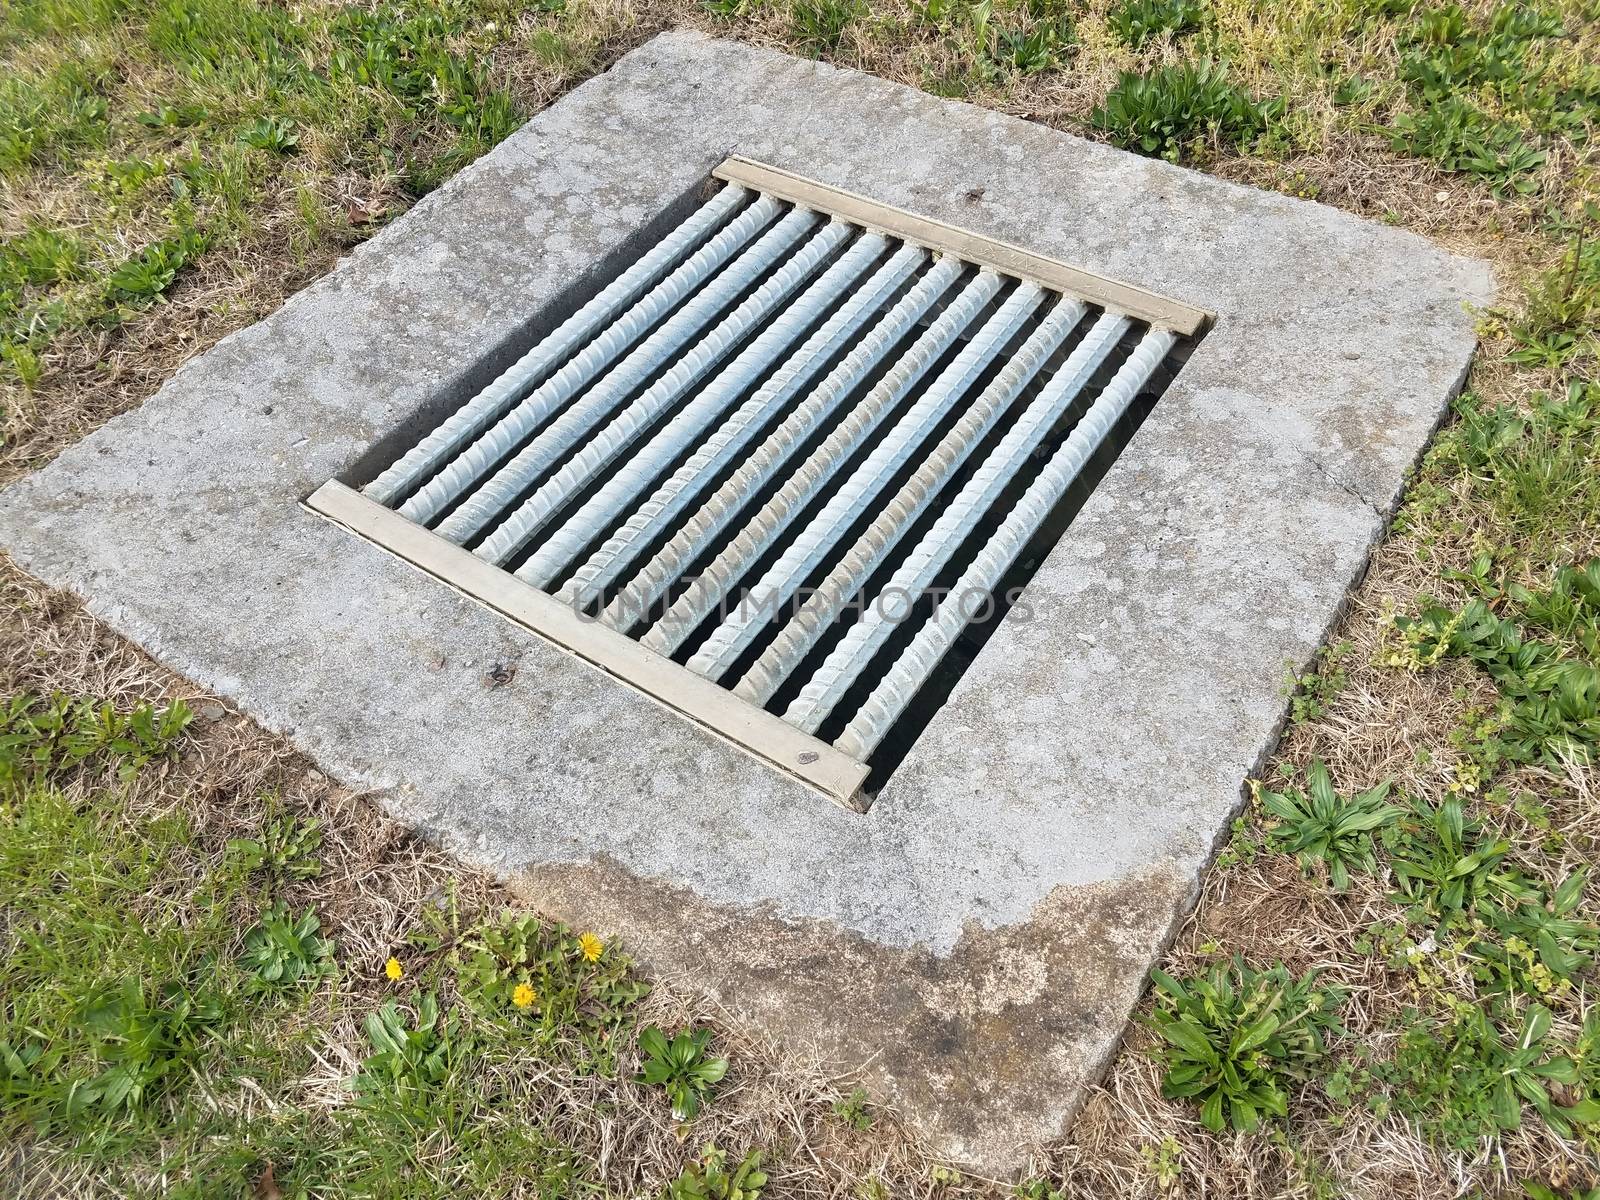 cement and metal grate or bars with drain and green grass or lawn